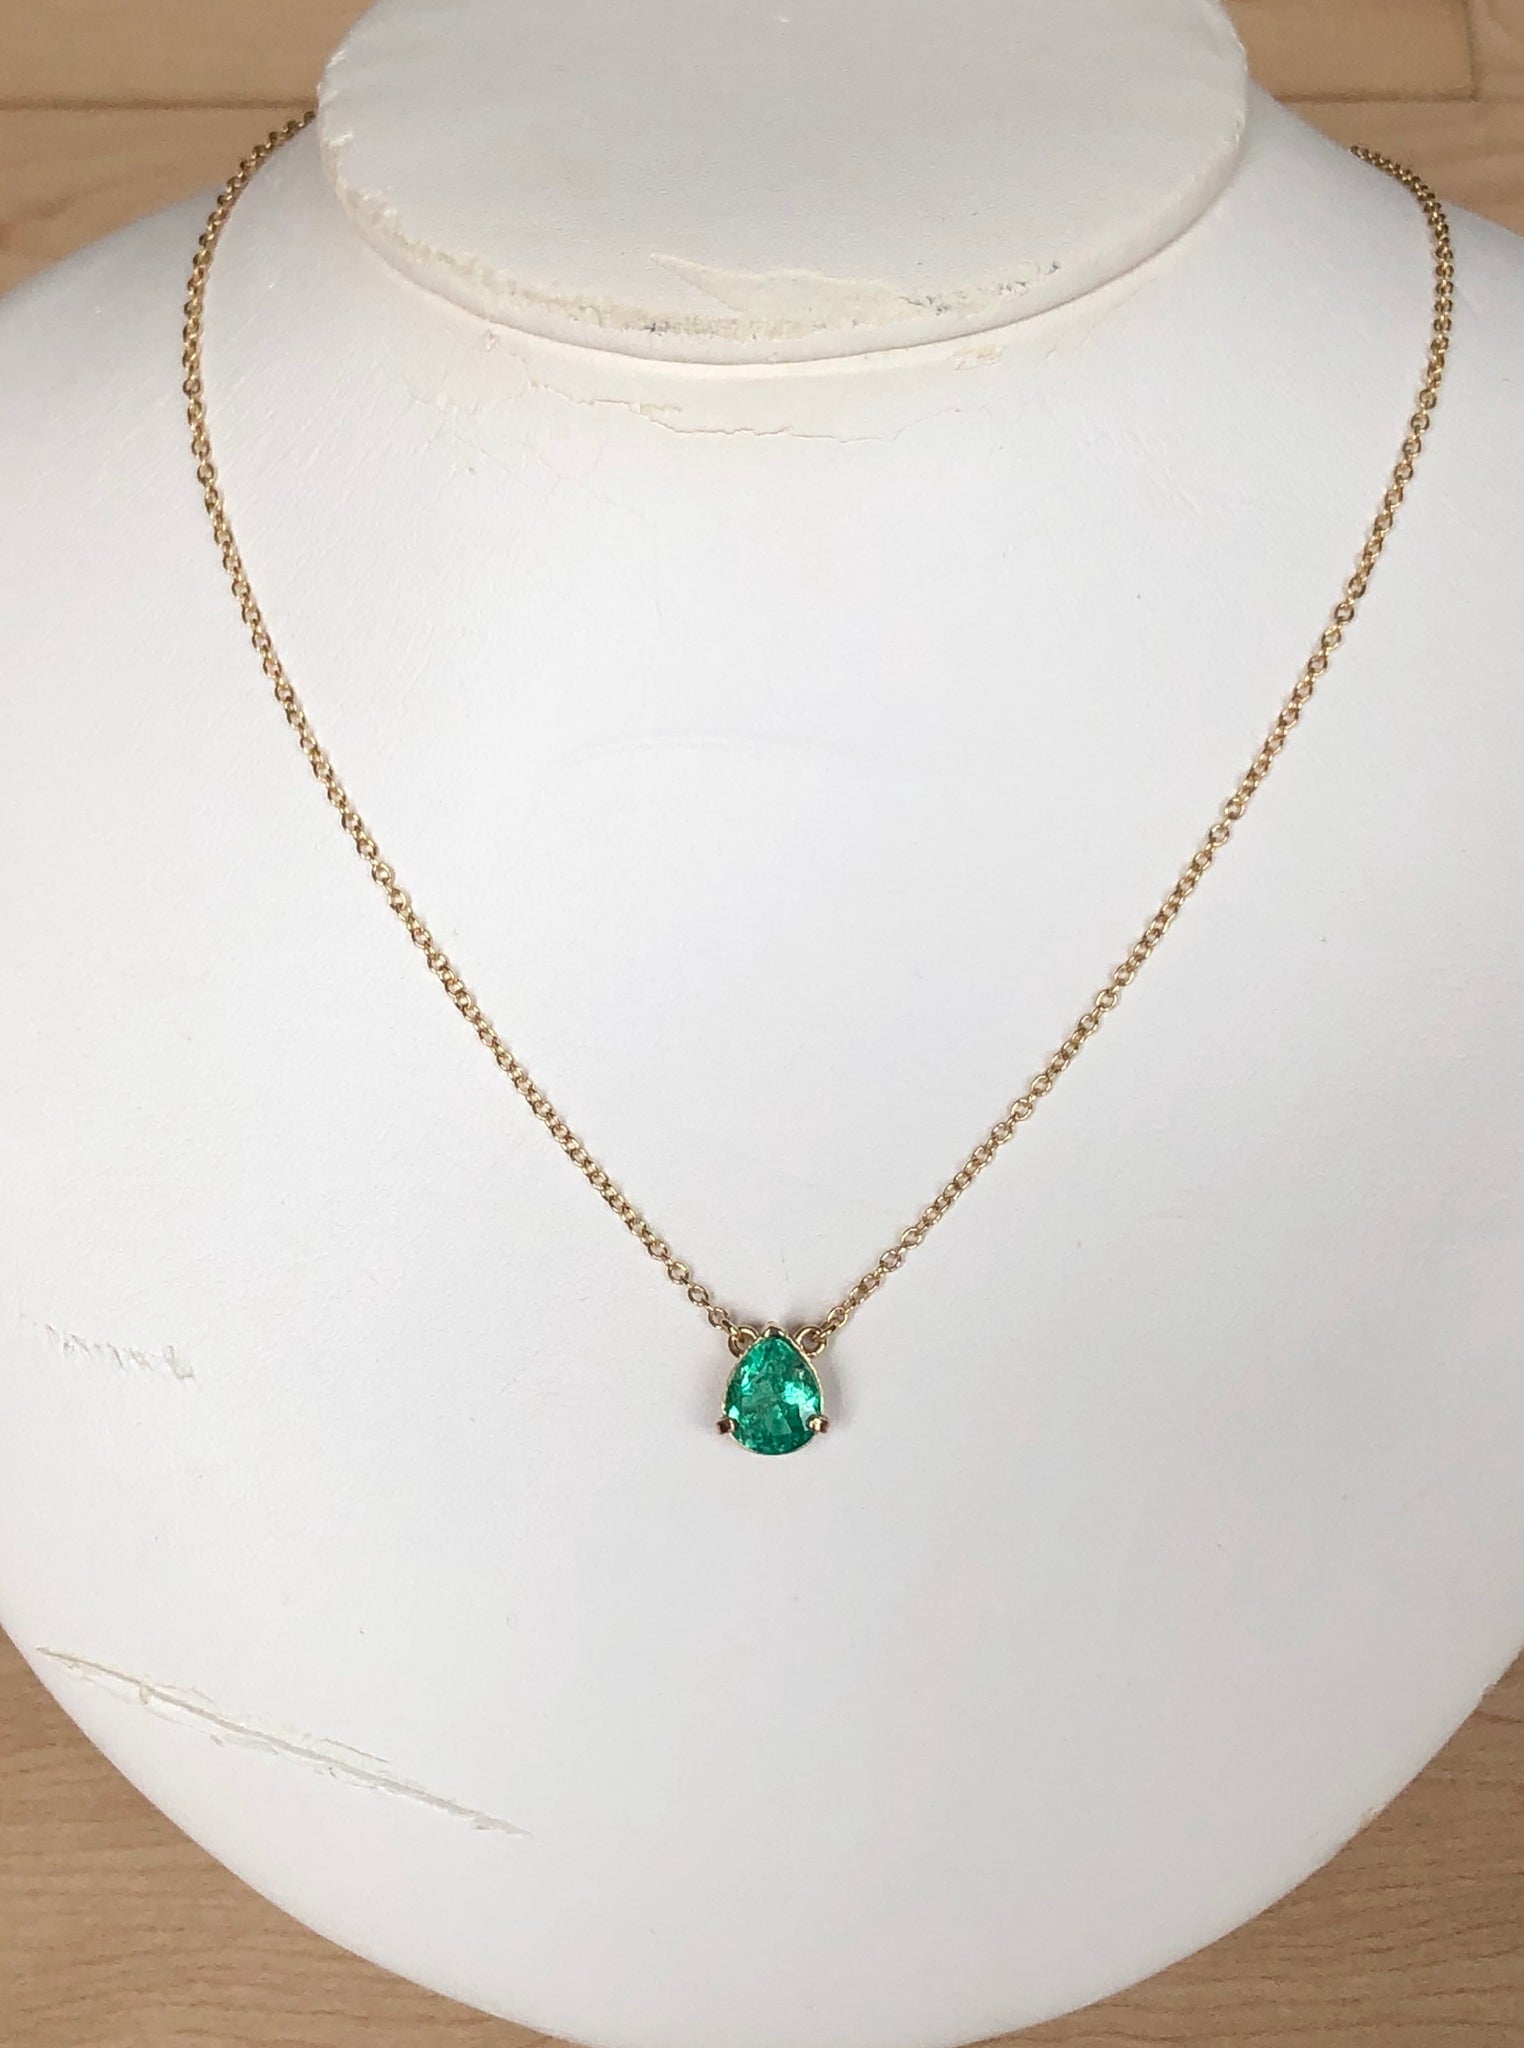 2.25 Carat Colombian Emerald Solitaire Pendant Necklace Yellow Gold 18K